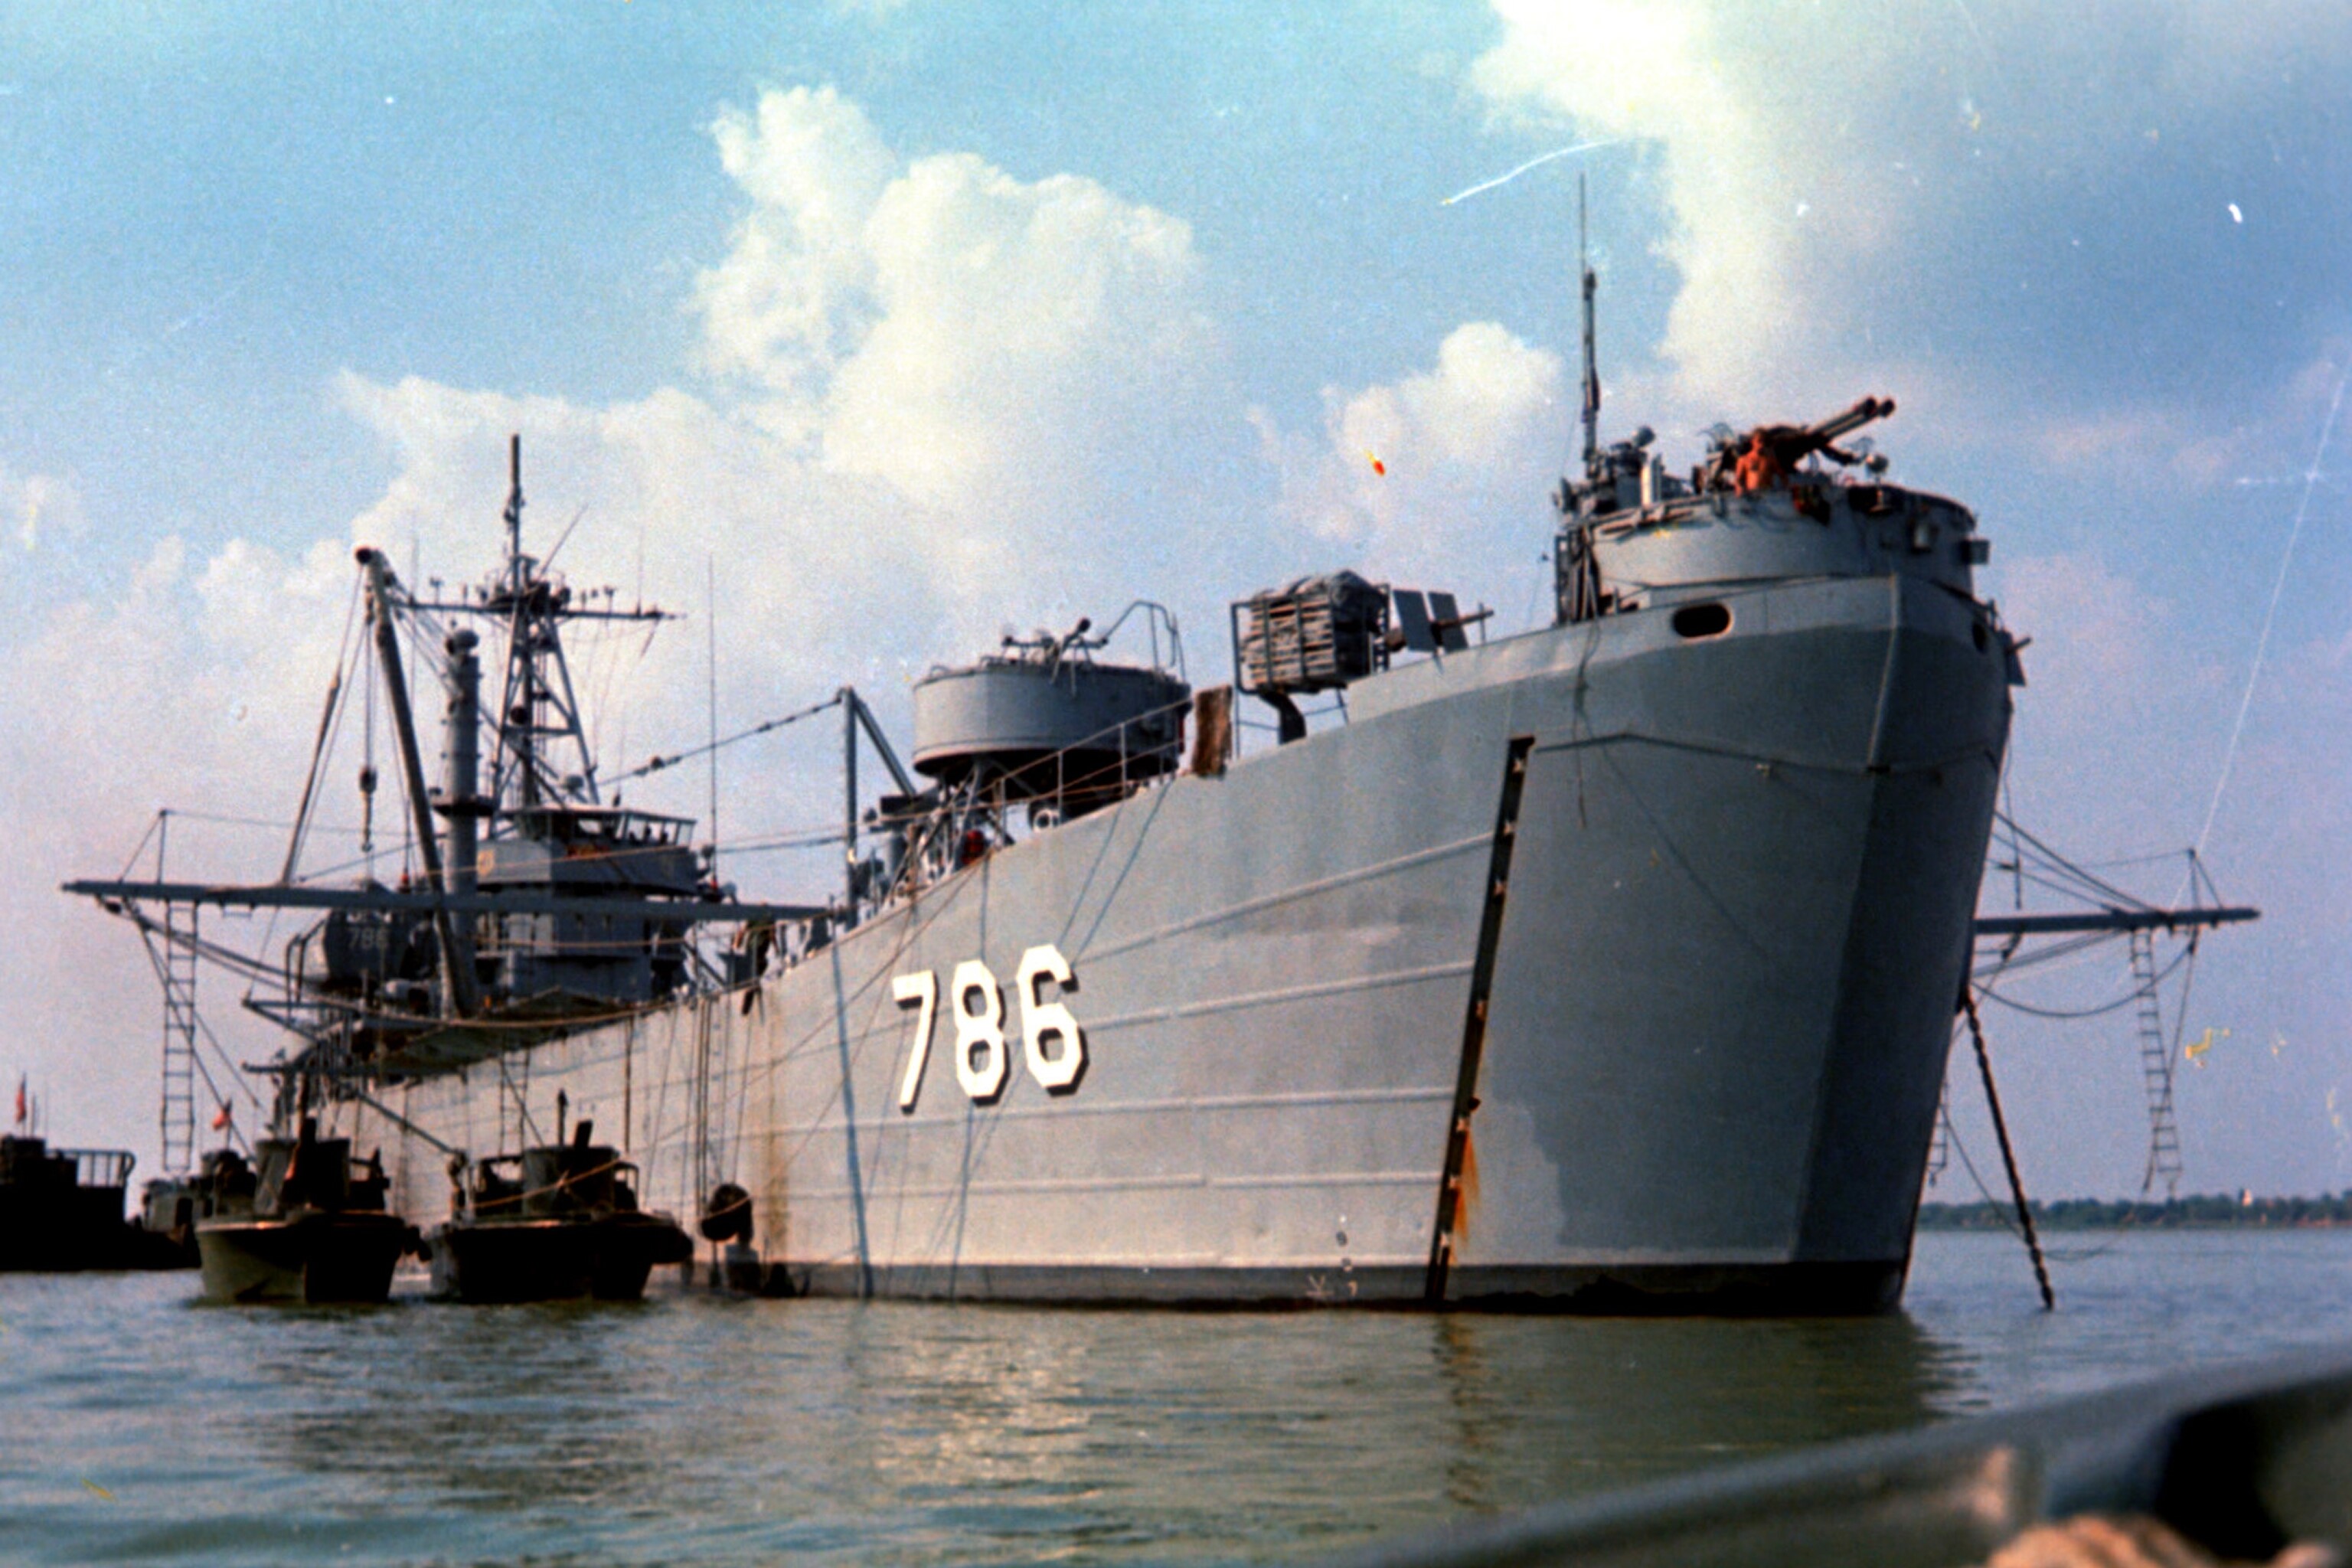 USS Garrett County, formerly the Coast Guard-manned World War II-vintage LST 786, used in Vietnam as a Navy mother ship for riverine operations. (navsource.org)